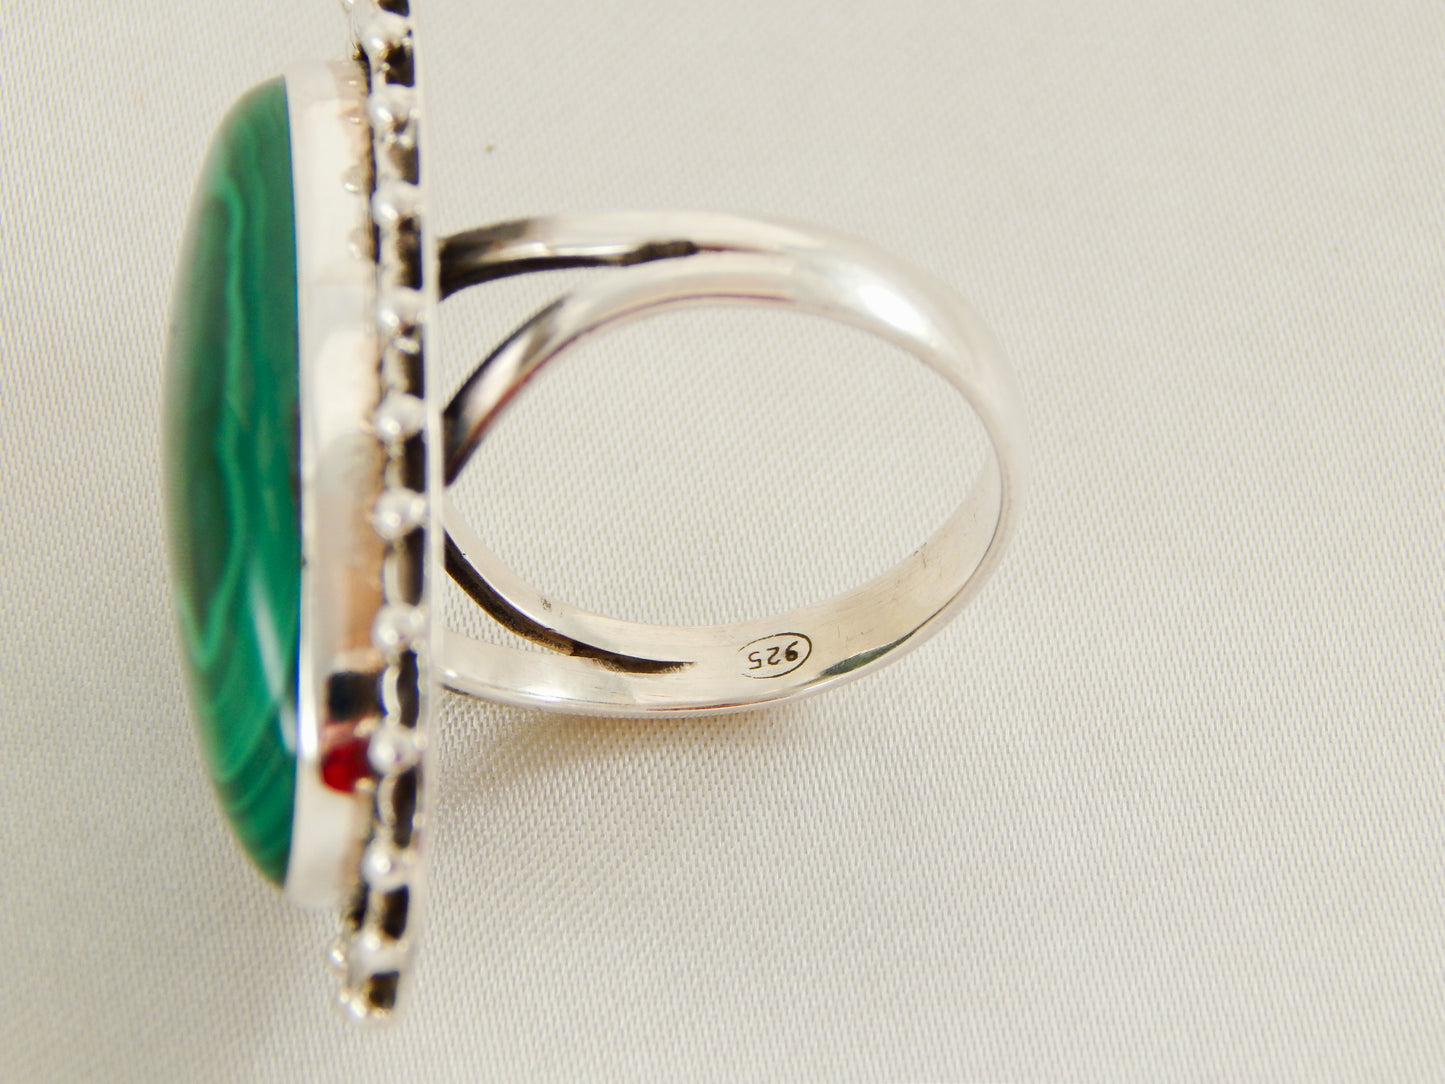 Genuine Malachite Oval Cut Statement Ring in 925 Sterling Silver